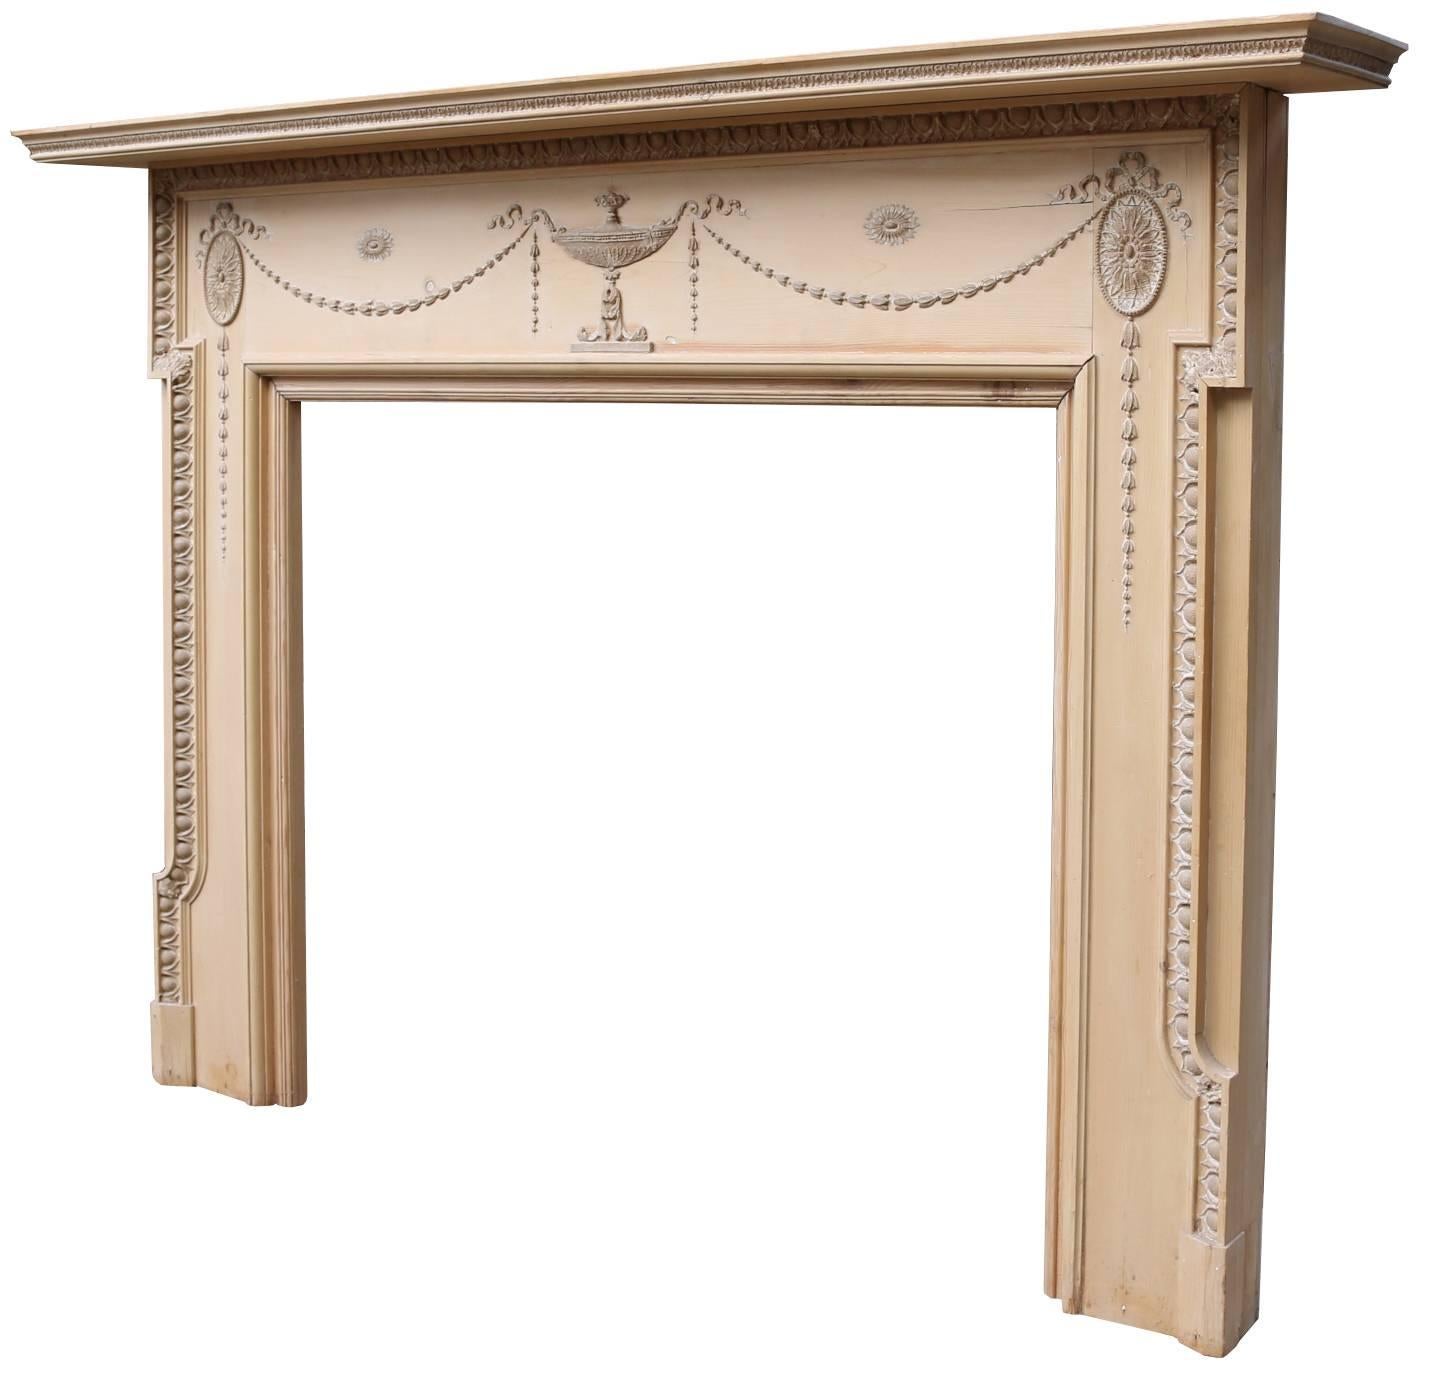 English Edwardian Pine and Composition Fire Surround with Mirrored over Mantel